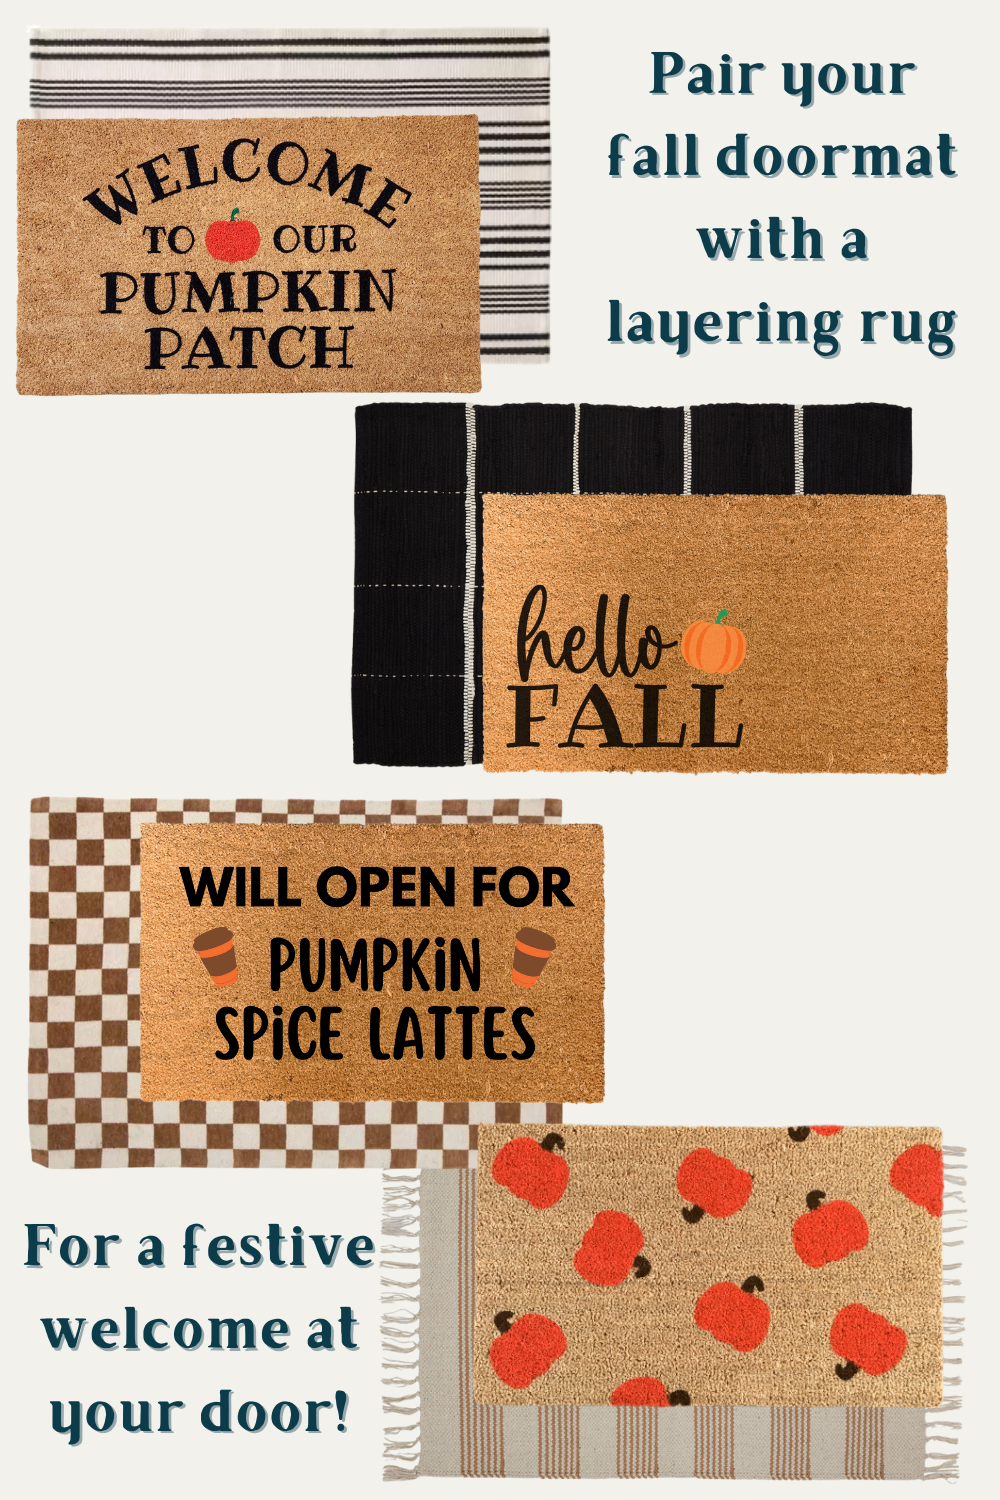 Welcoming Fall with Style: The Perfect Fall Doormats and Layering Rugs